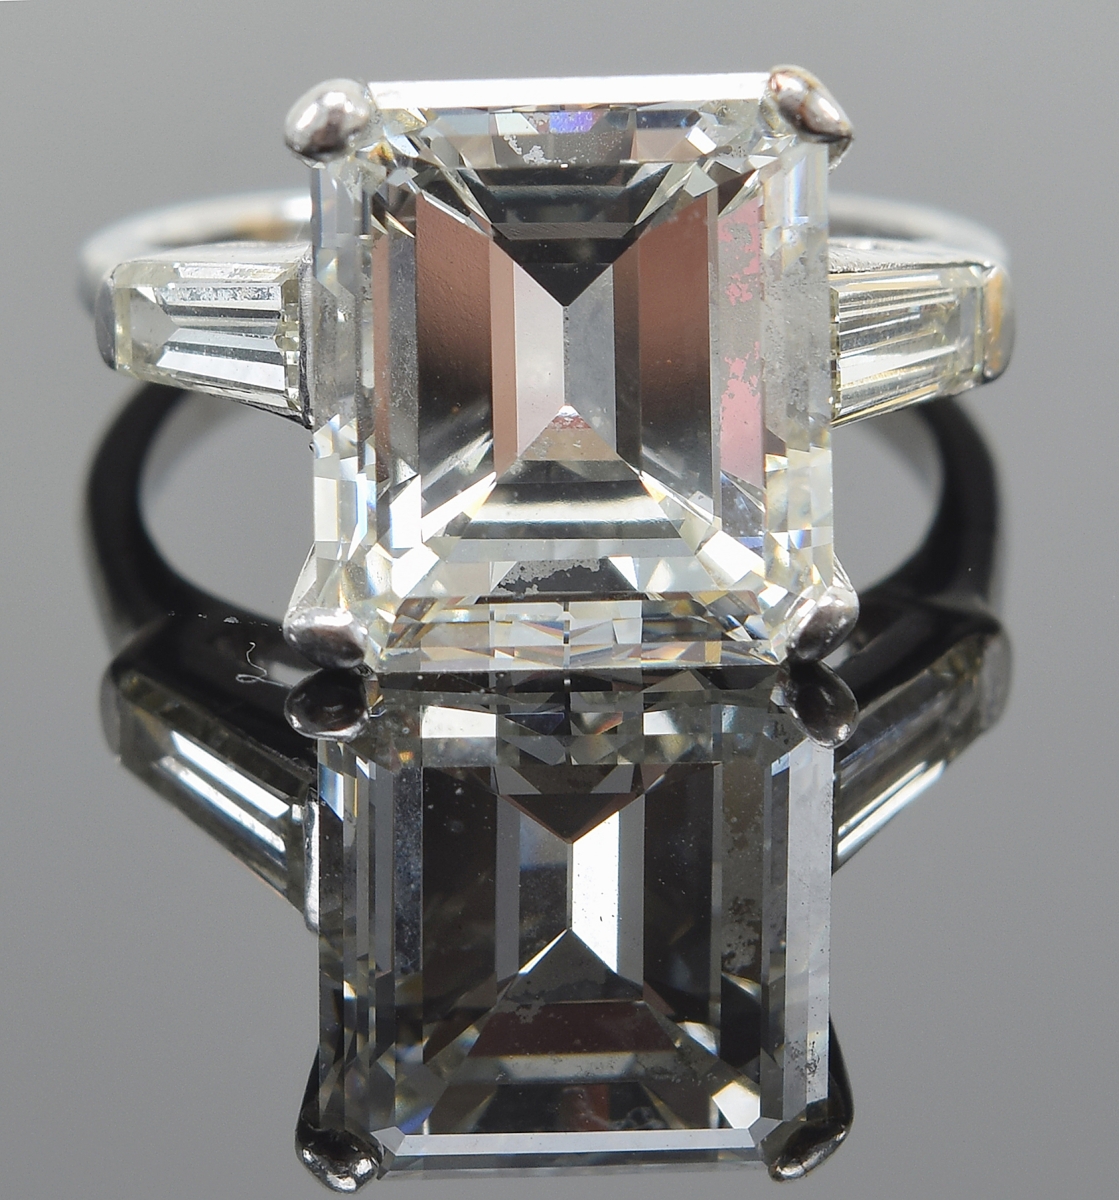 Two 4-carat diamond rings were included in the sale. This one, a lady’s 4.7-carat solitaire emerald cut diamond and platinum ring, brought $39,270.